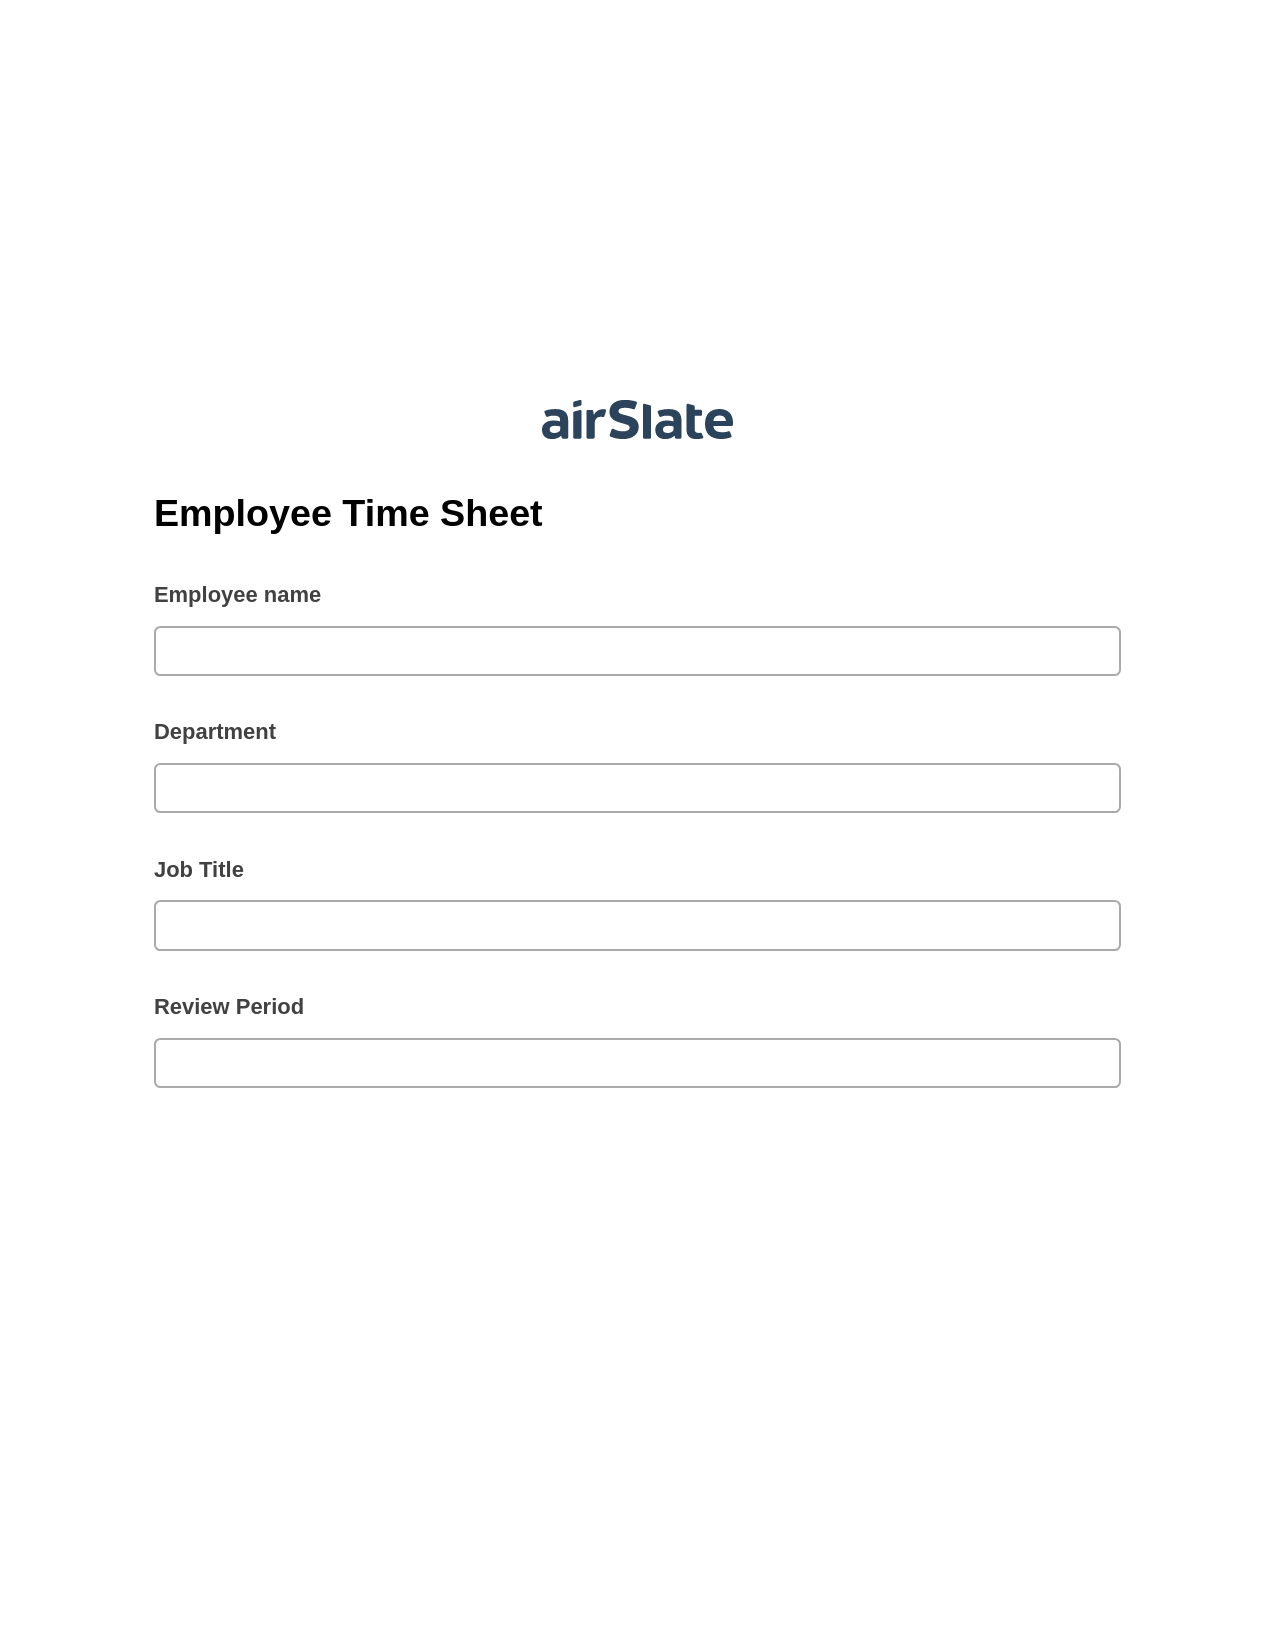 Employee Time Sheet Pre-fill from MS Dynamics 365 Records, Create slate addon, Archive to Box Bot